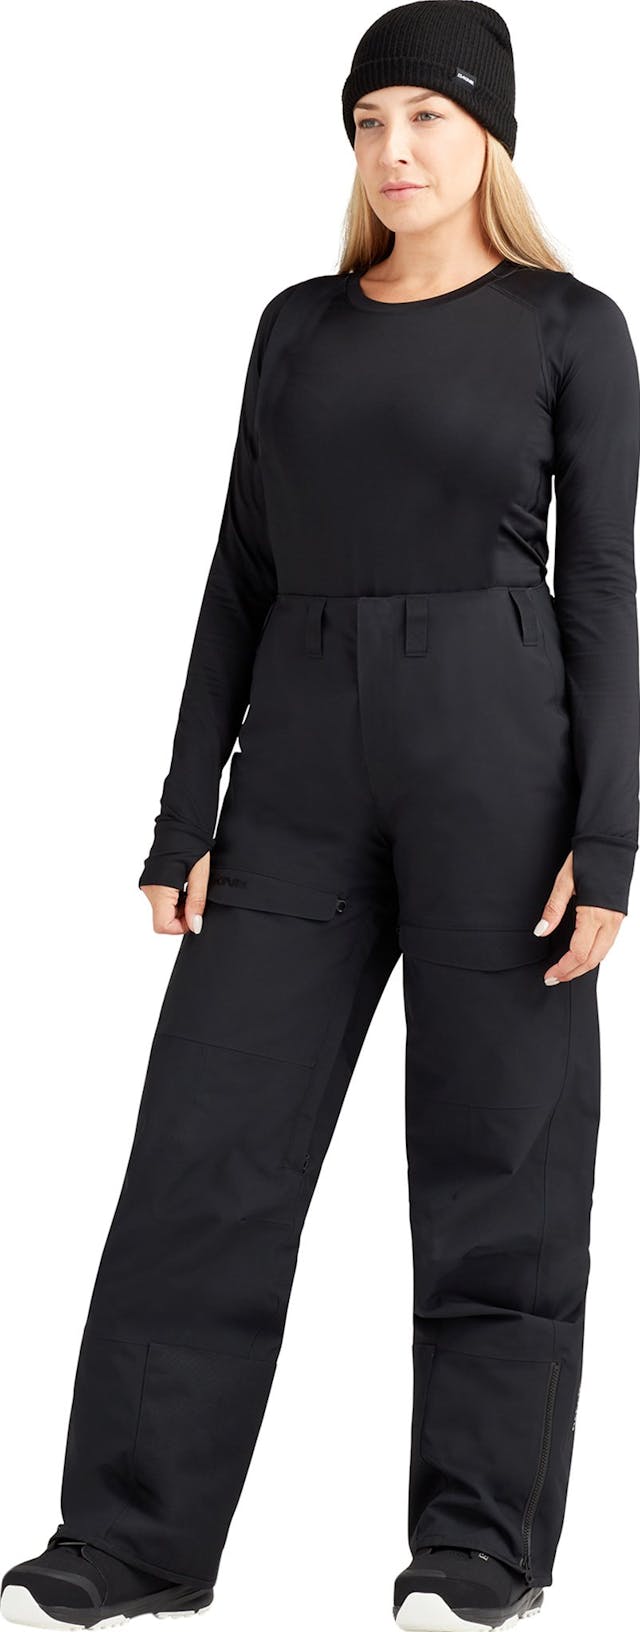 Product image for Reach 20K 2 Layer Pant - Women's